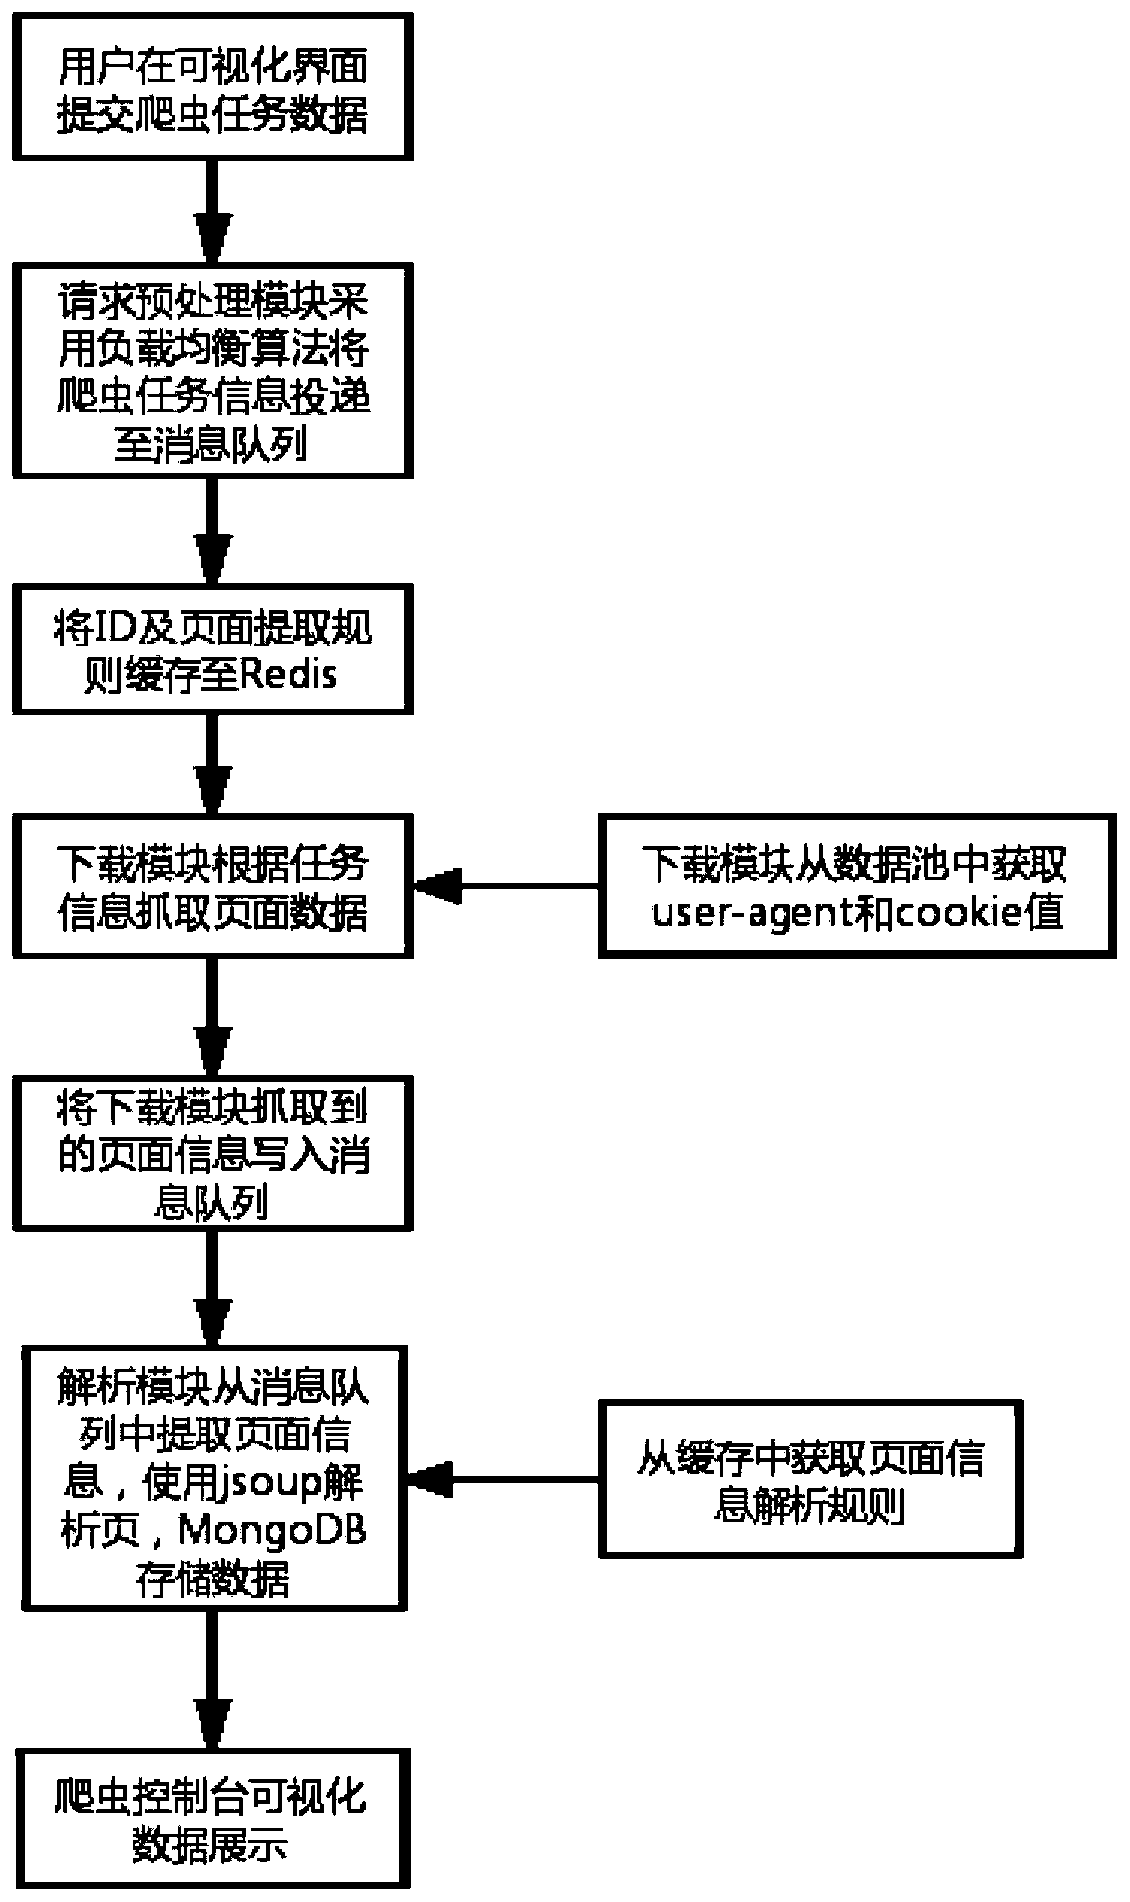 Distributed web crawler data extraction system and method based on micro-service architecture